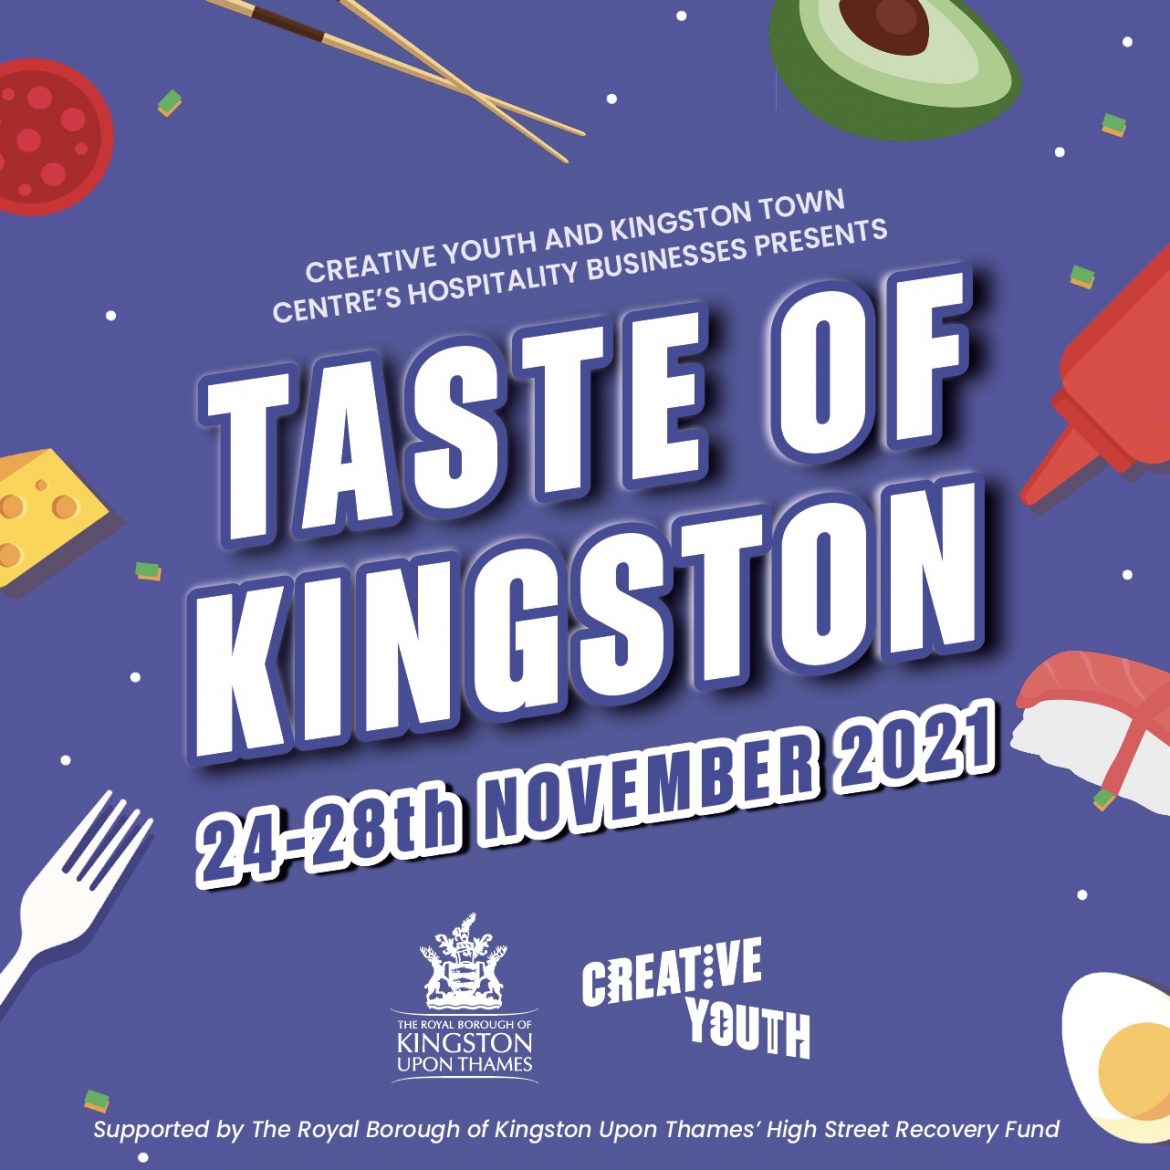 Students invited to take part in Taste of Kingston